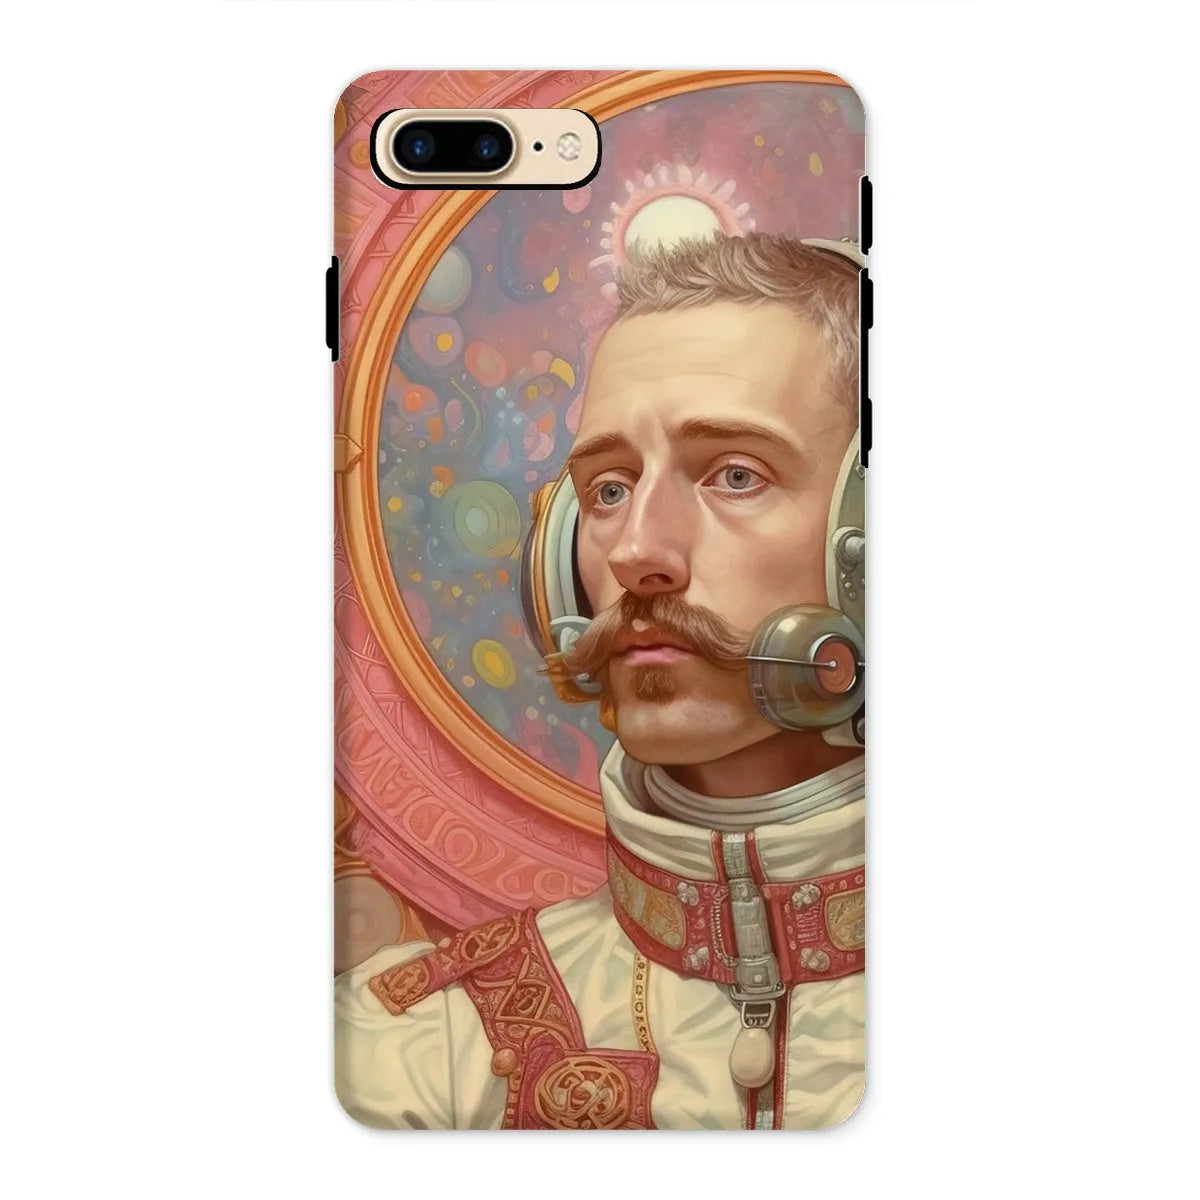 Axel The Gay Astronaut - Gay Aesthetic Art Phone Case - Iphone 8 Plus / Matte - Mobile Phone Cases - Aesthetic Art